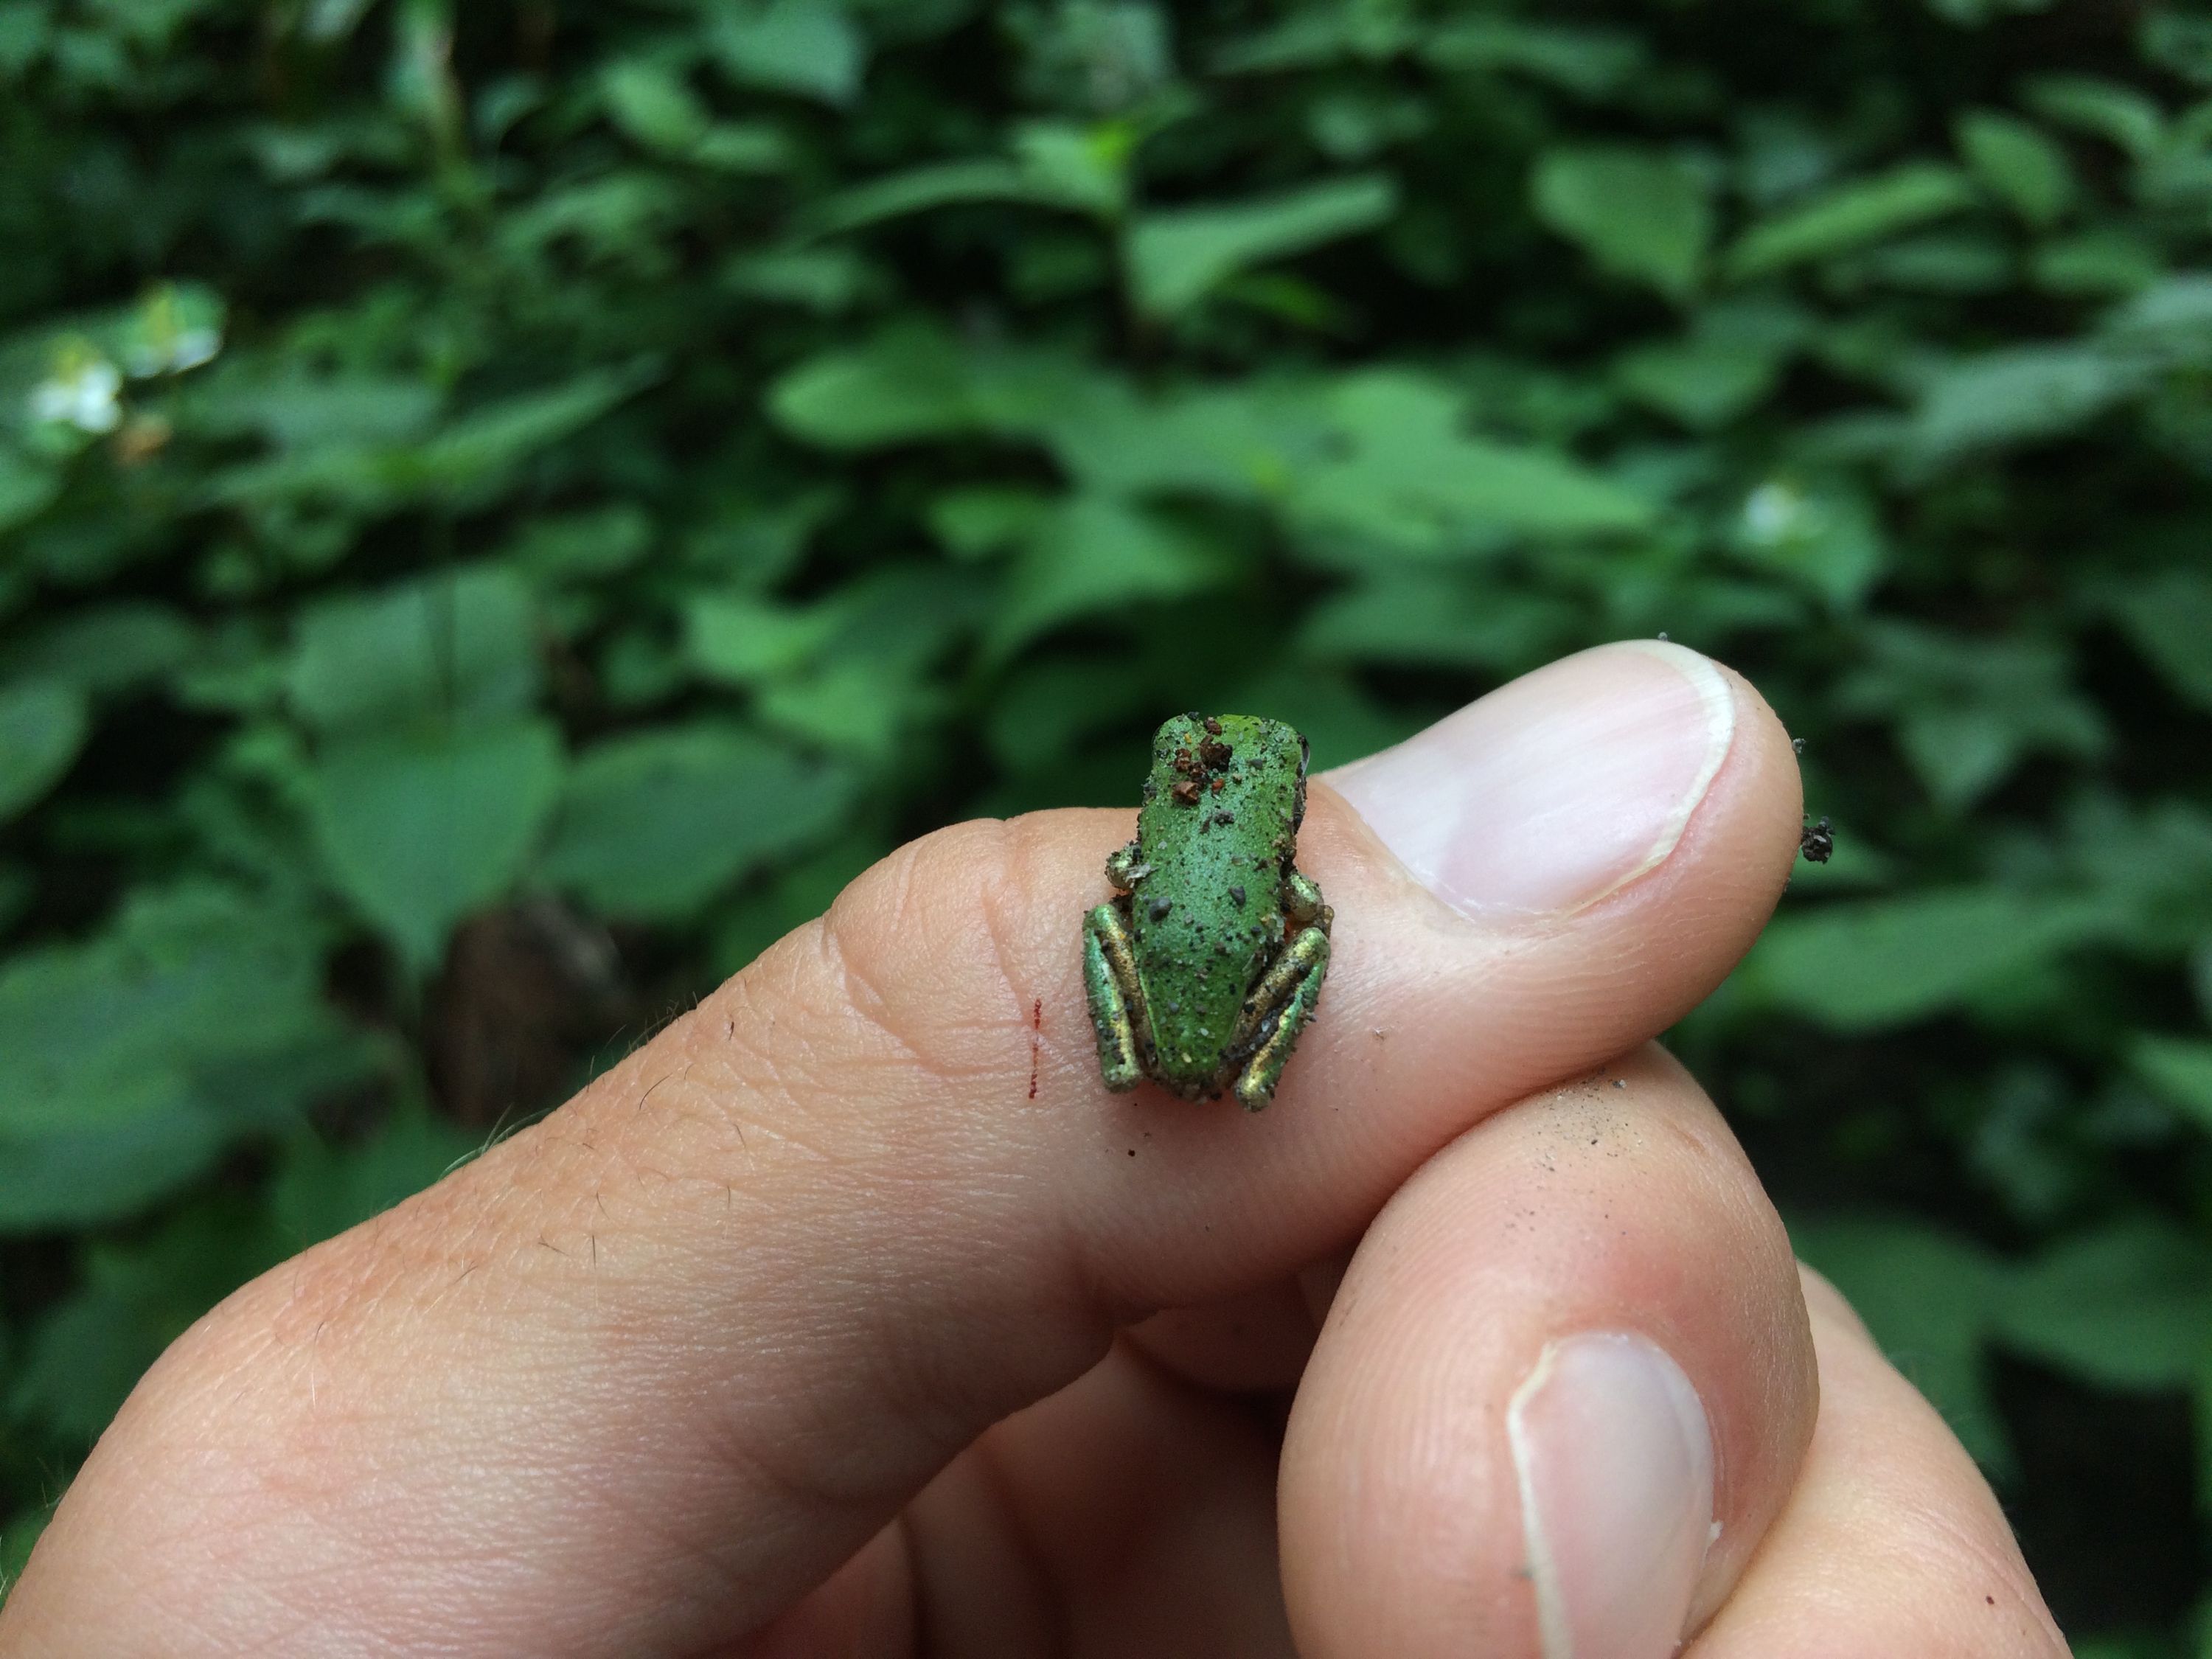 A very small tree frog sits on the author’s left thumb.